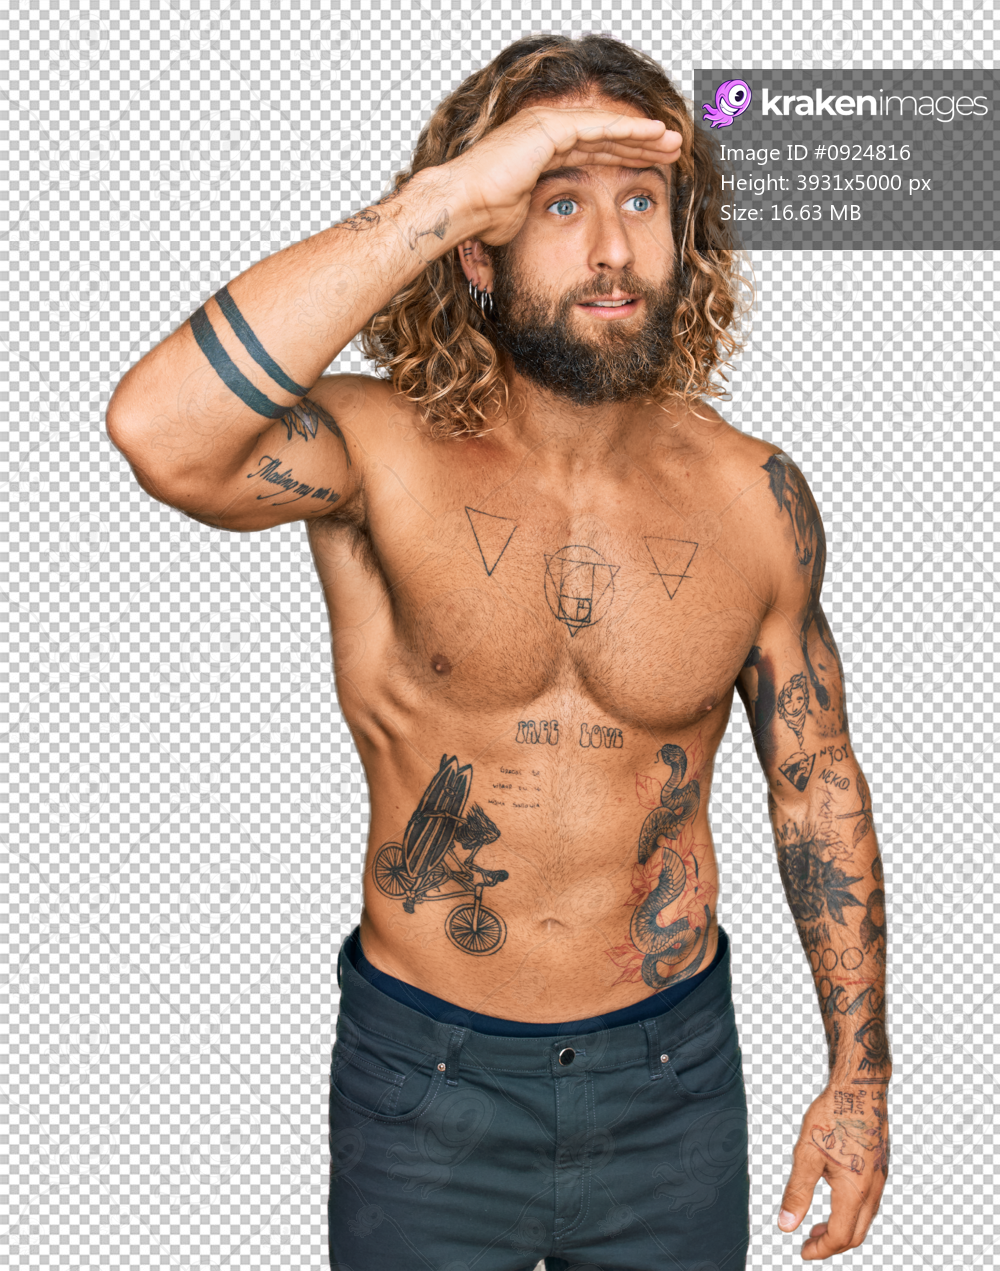 Handsome man with beard and long hair standing shirtless showing tattoos  very happy and smiling looking far away with hand over head searching  concept  Kraken Images